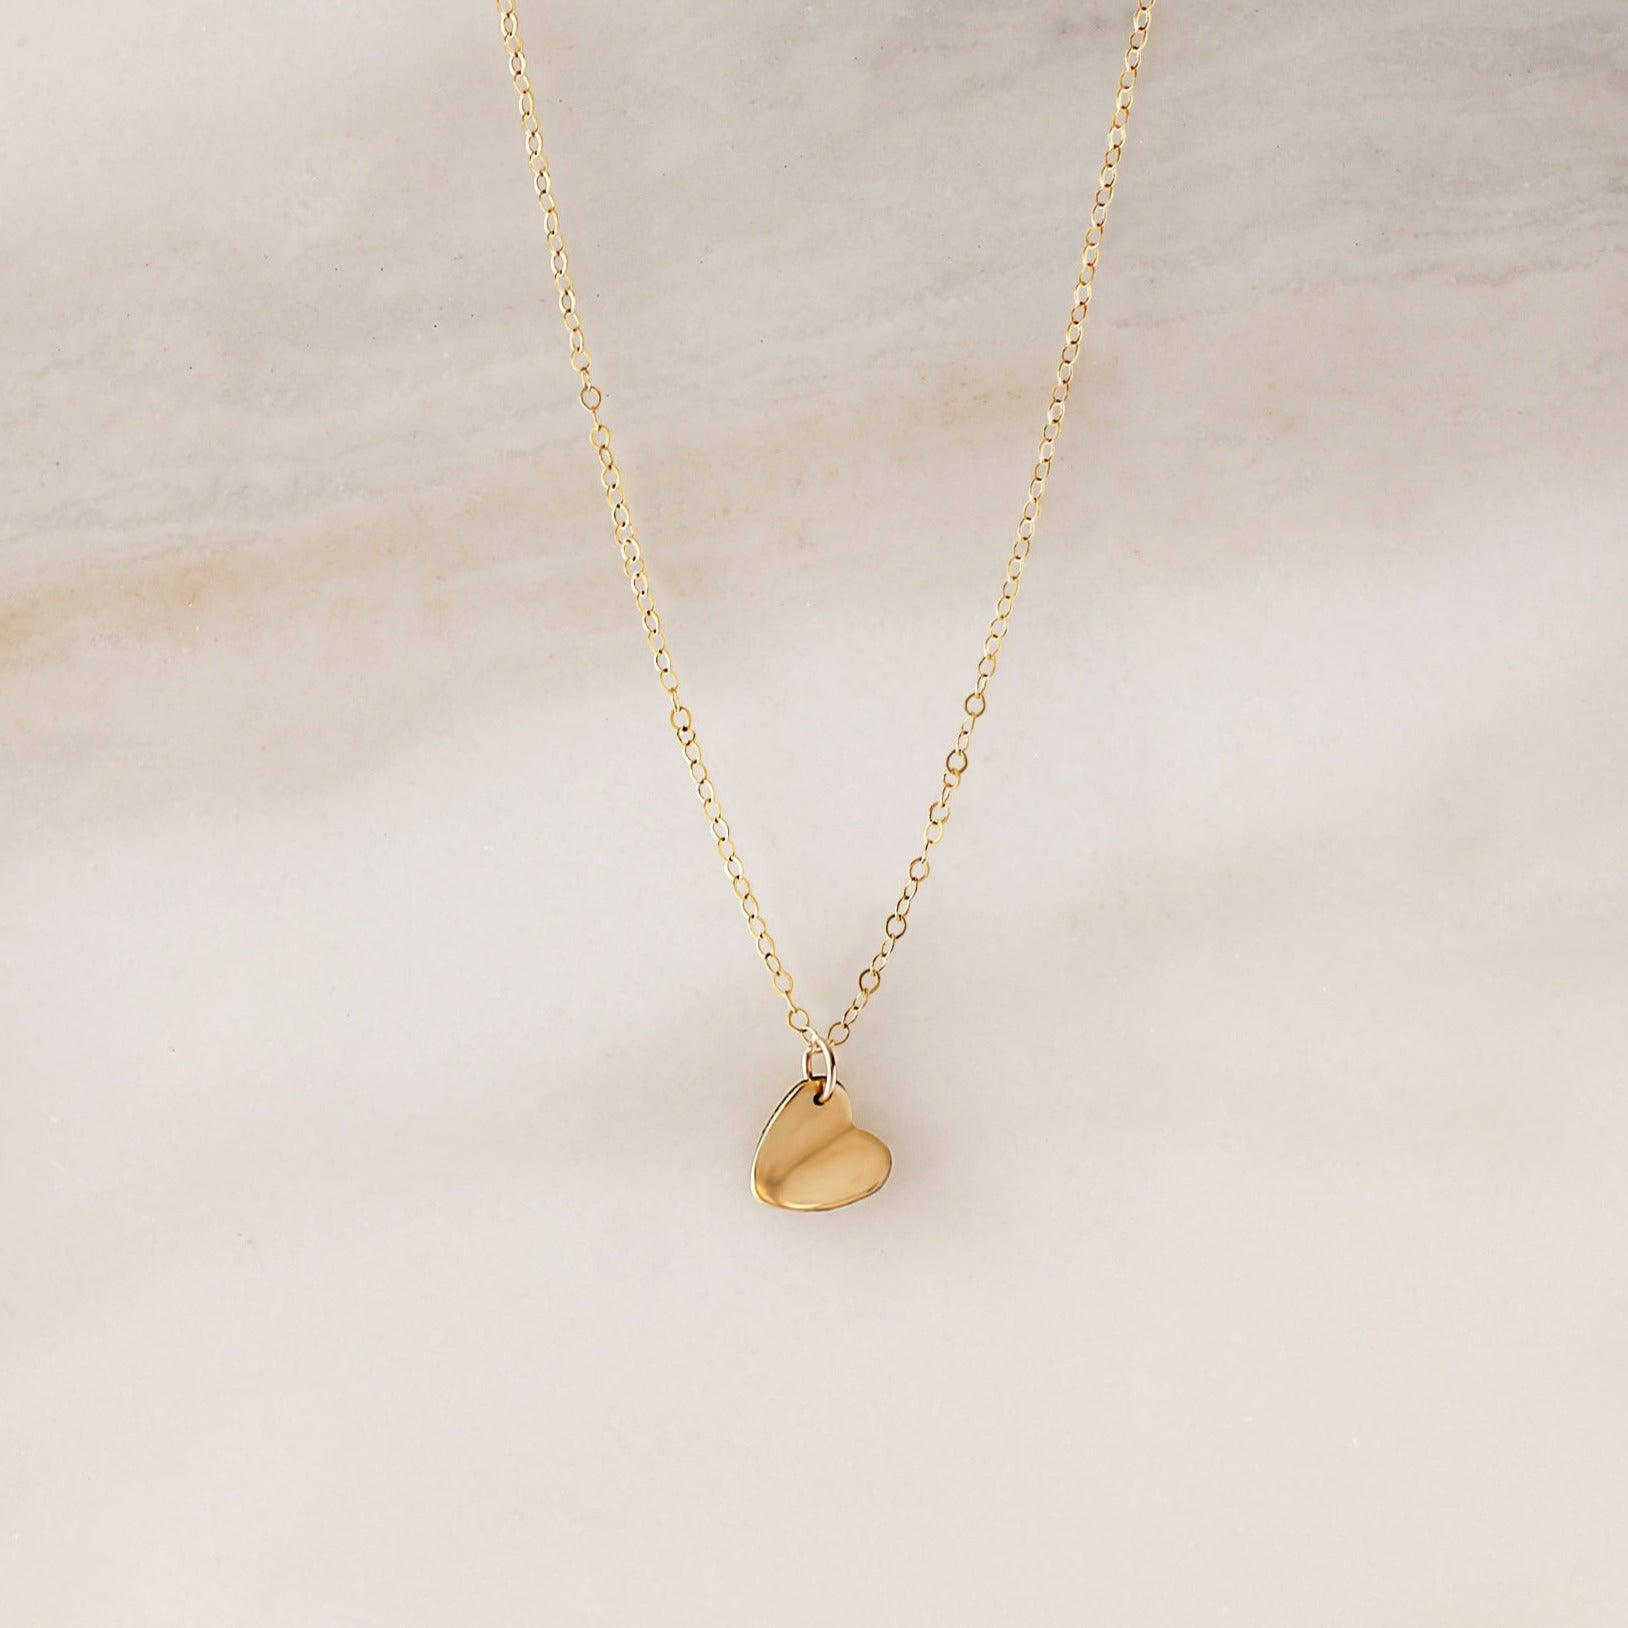 Mini Paper Heart Necklace - Nolia Jewelry - Meaningful + Sustainably Handcrafted Jewelry